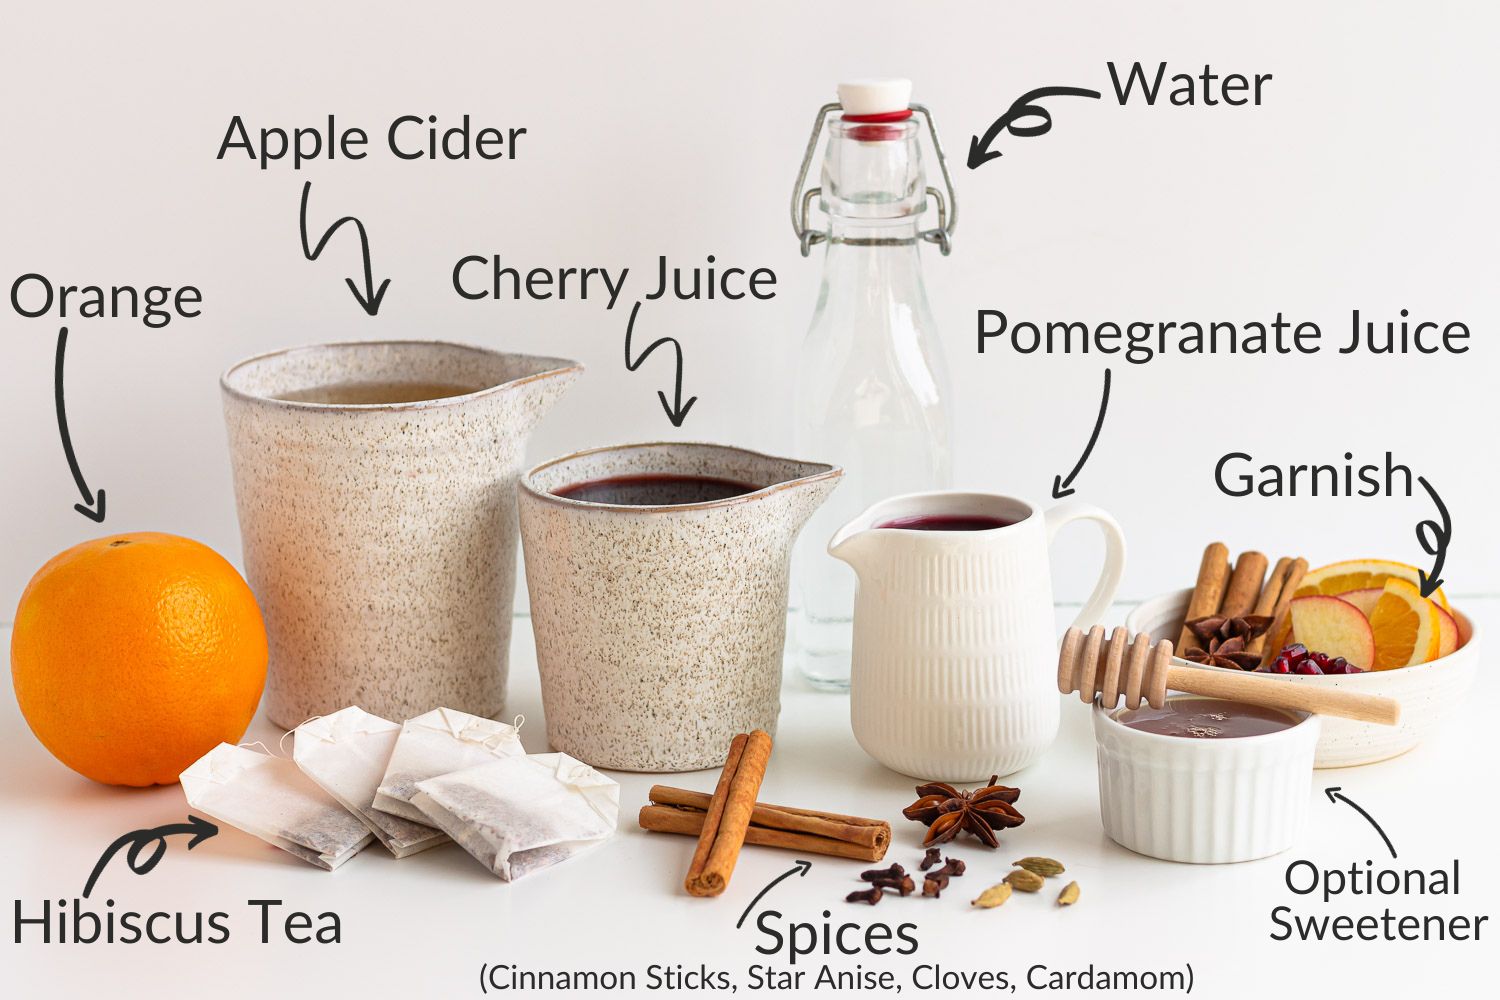 Labelled photo of Kinderpunsch ingredients.